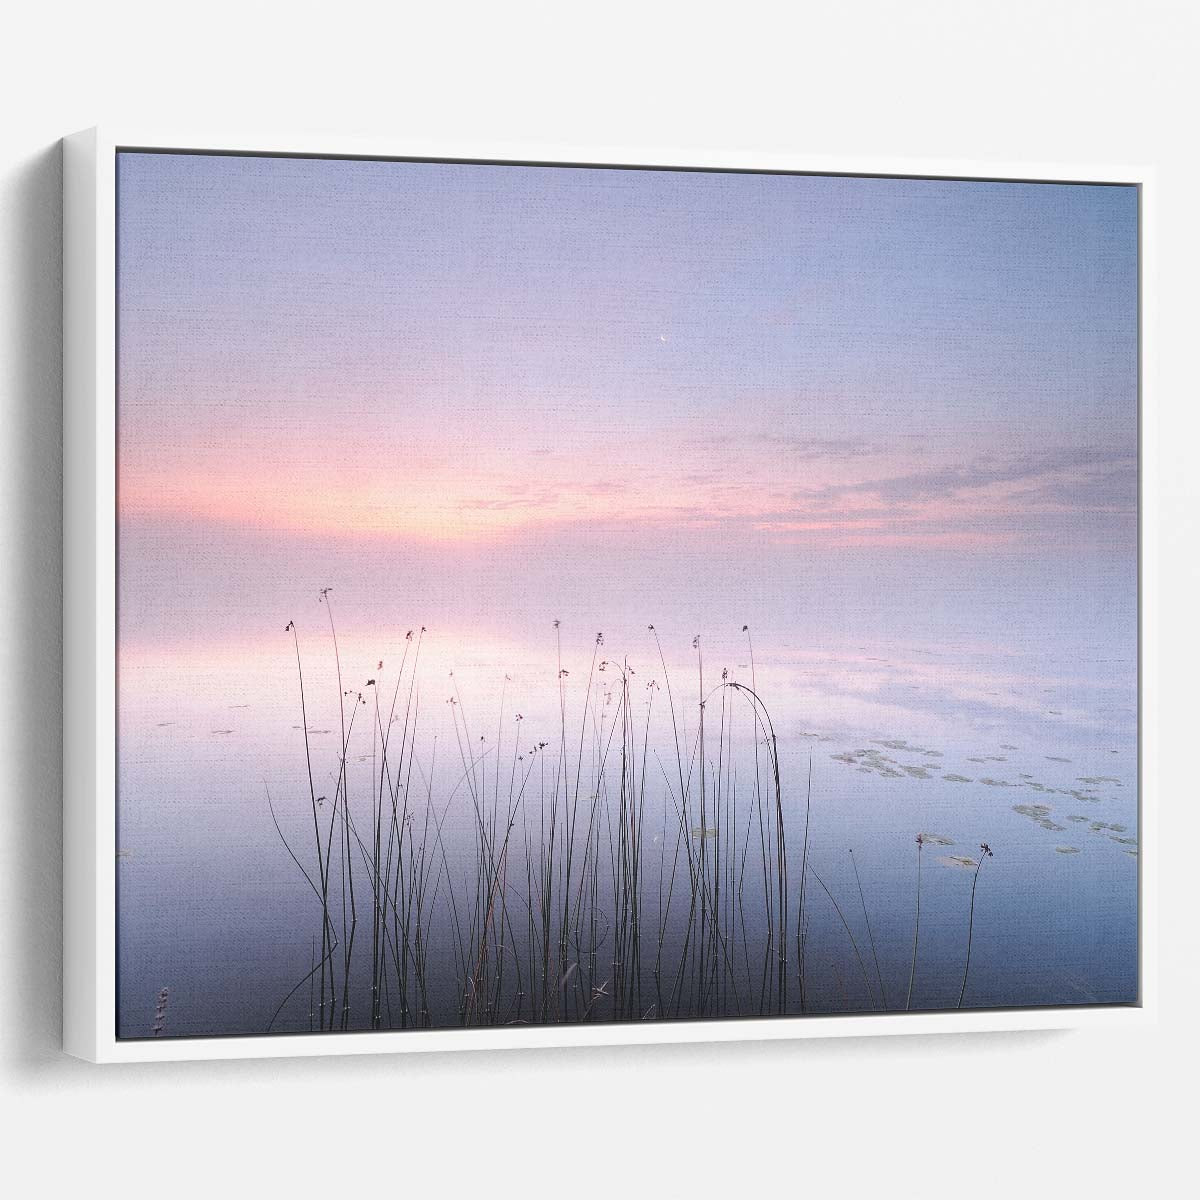 Serene Swedish Lake at Dusk Pastel Wall Art by Luxuriance Designs. Made in USA.